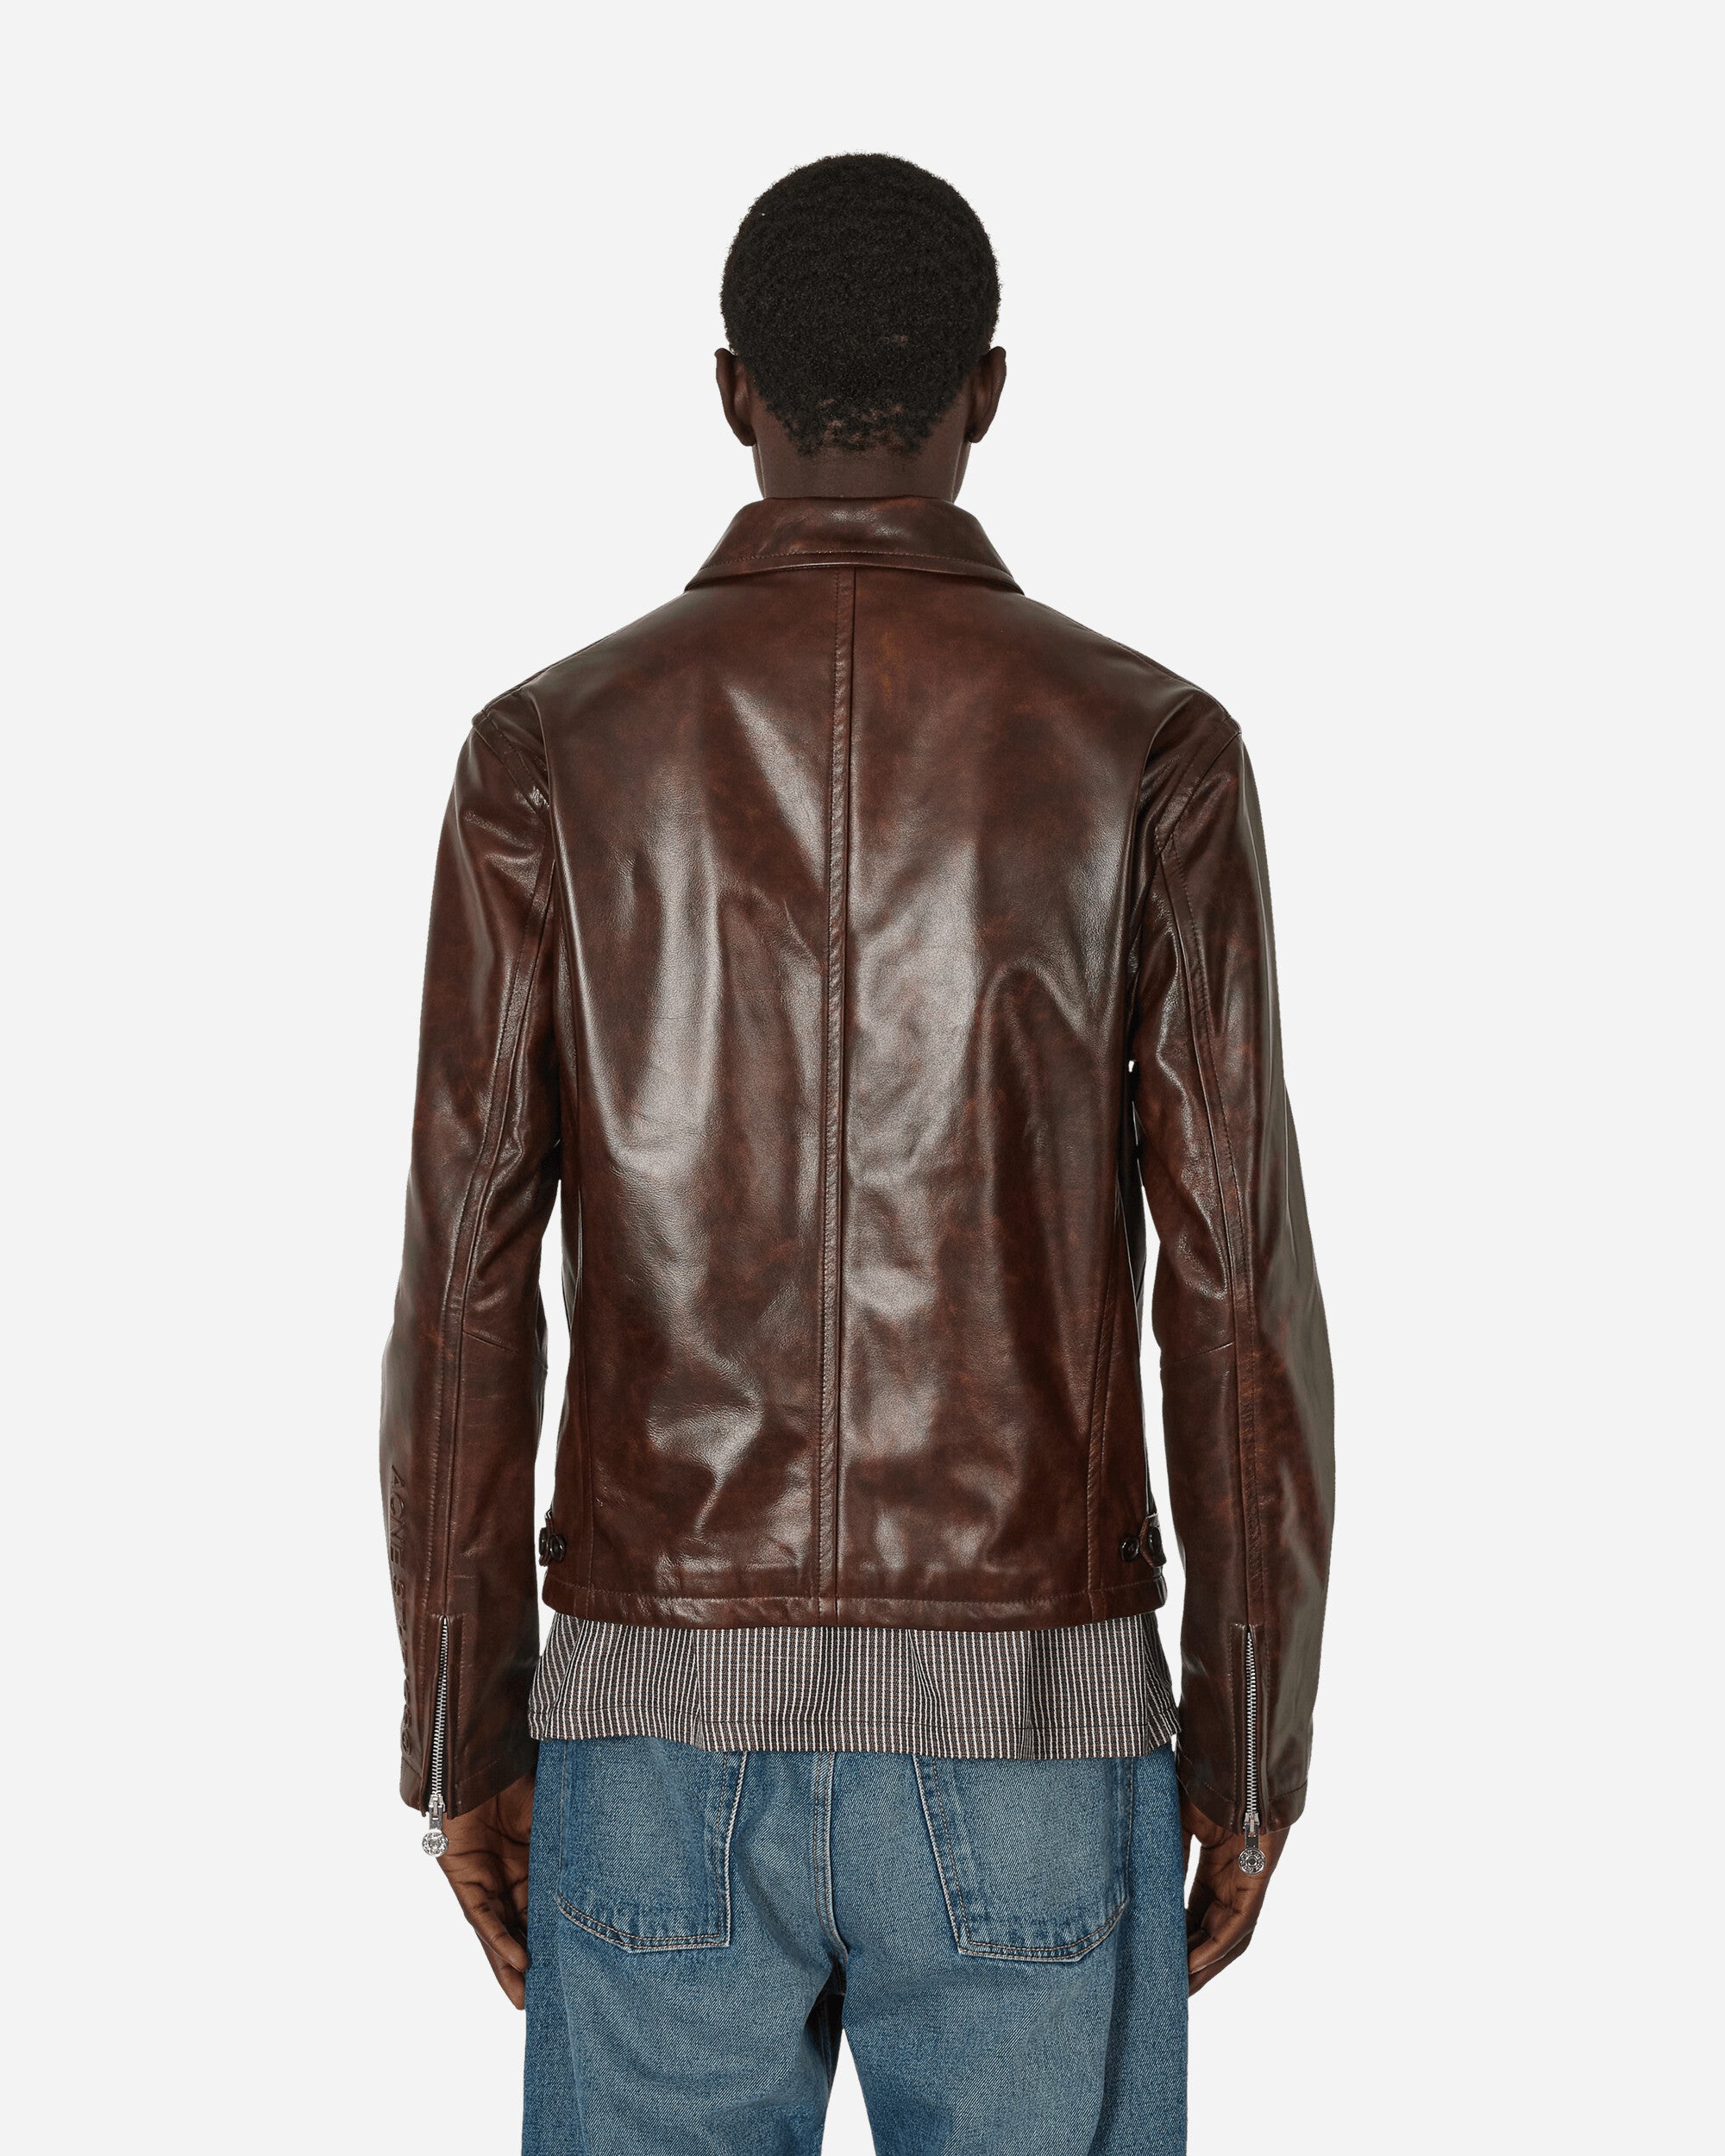 Acne Studios Leather Jacket Brown Coats and Jackets Leather Jackets B70138- 700